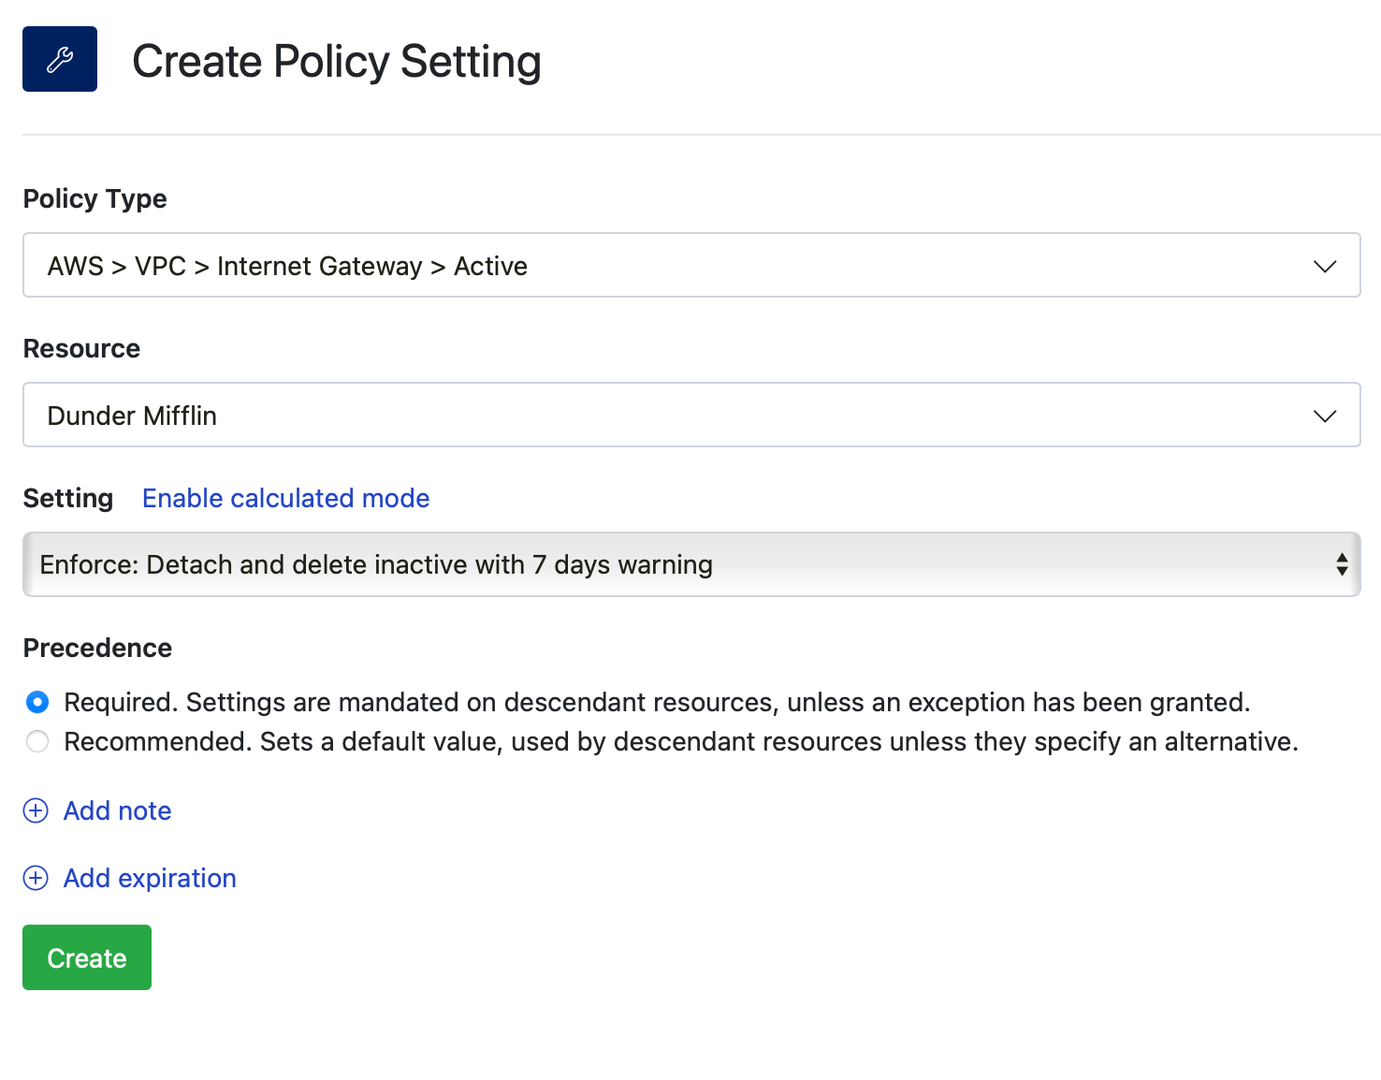 Policy setting to delete inactive internet gateway